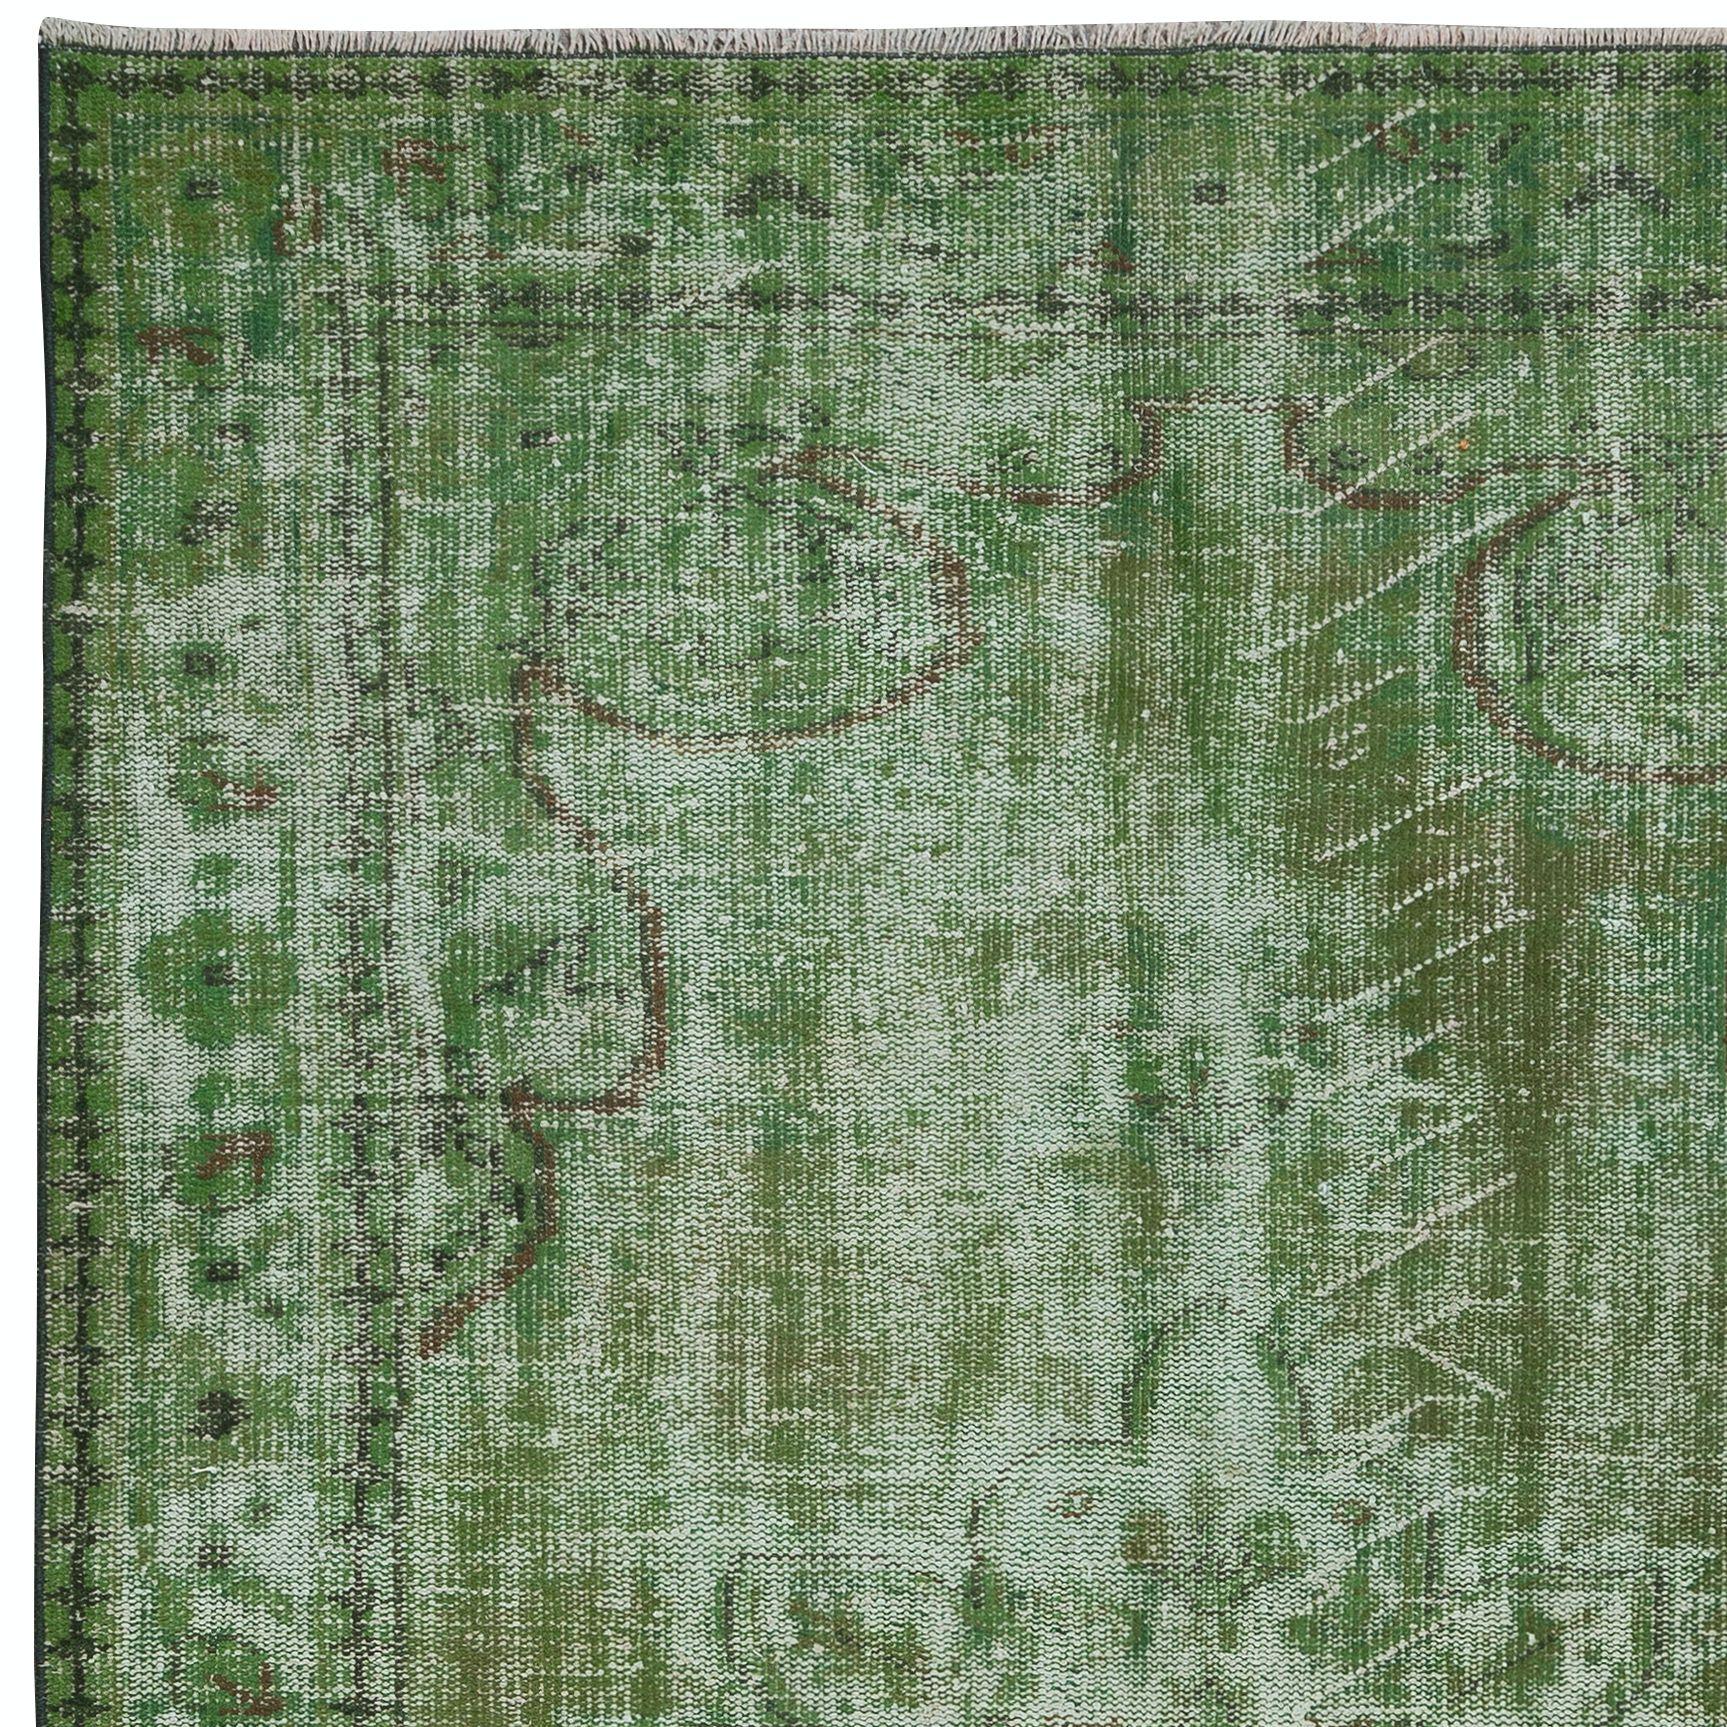 Hand-Knotted 5.5x9 Ft Handmade Turkish Area Rug in Green, Modern Home Decor Carpet For Sale